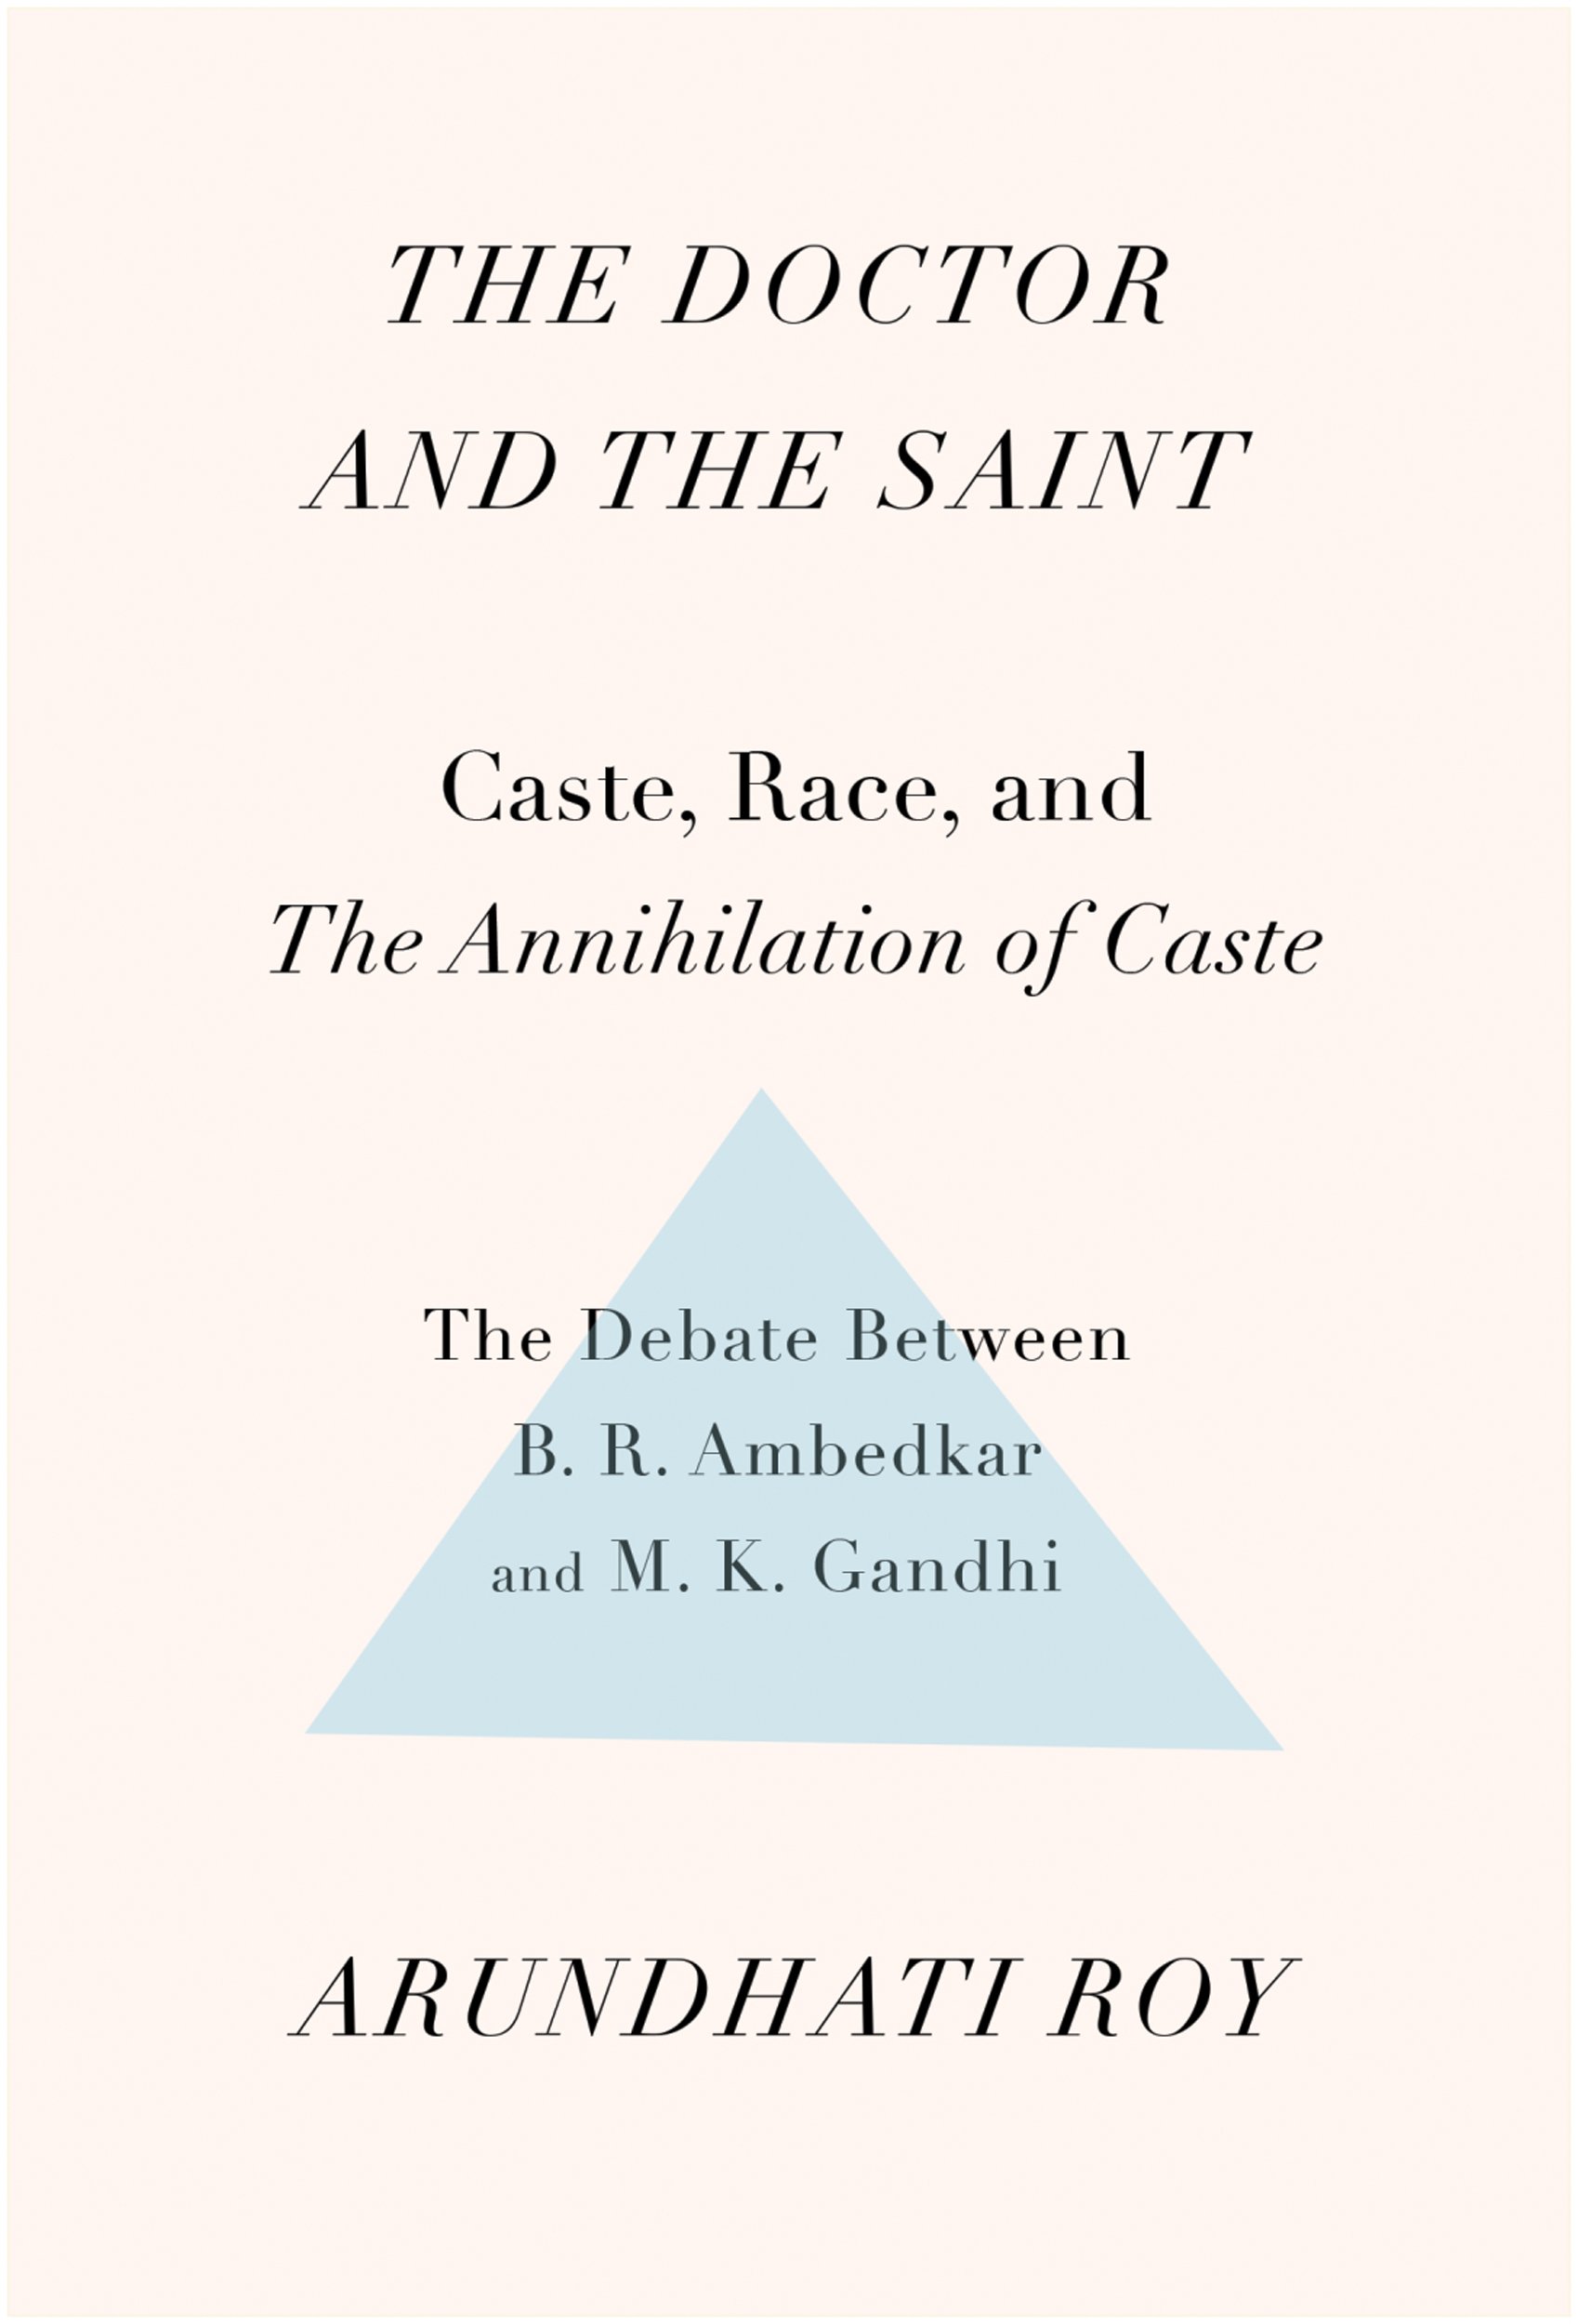 Book Cover The Doctor and the Saint: Caste, Race, and Annihilation of Caste, the Debate Between B.R. Ambedkar and M.K. Gandhi